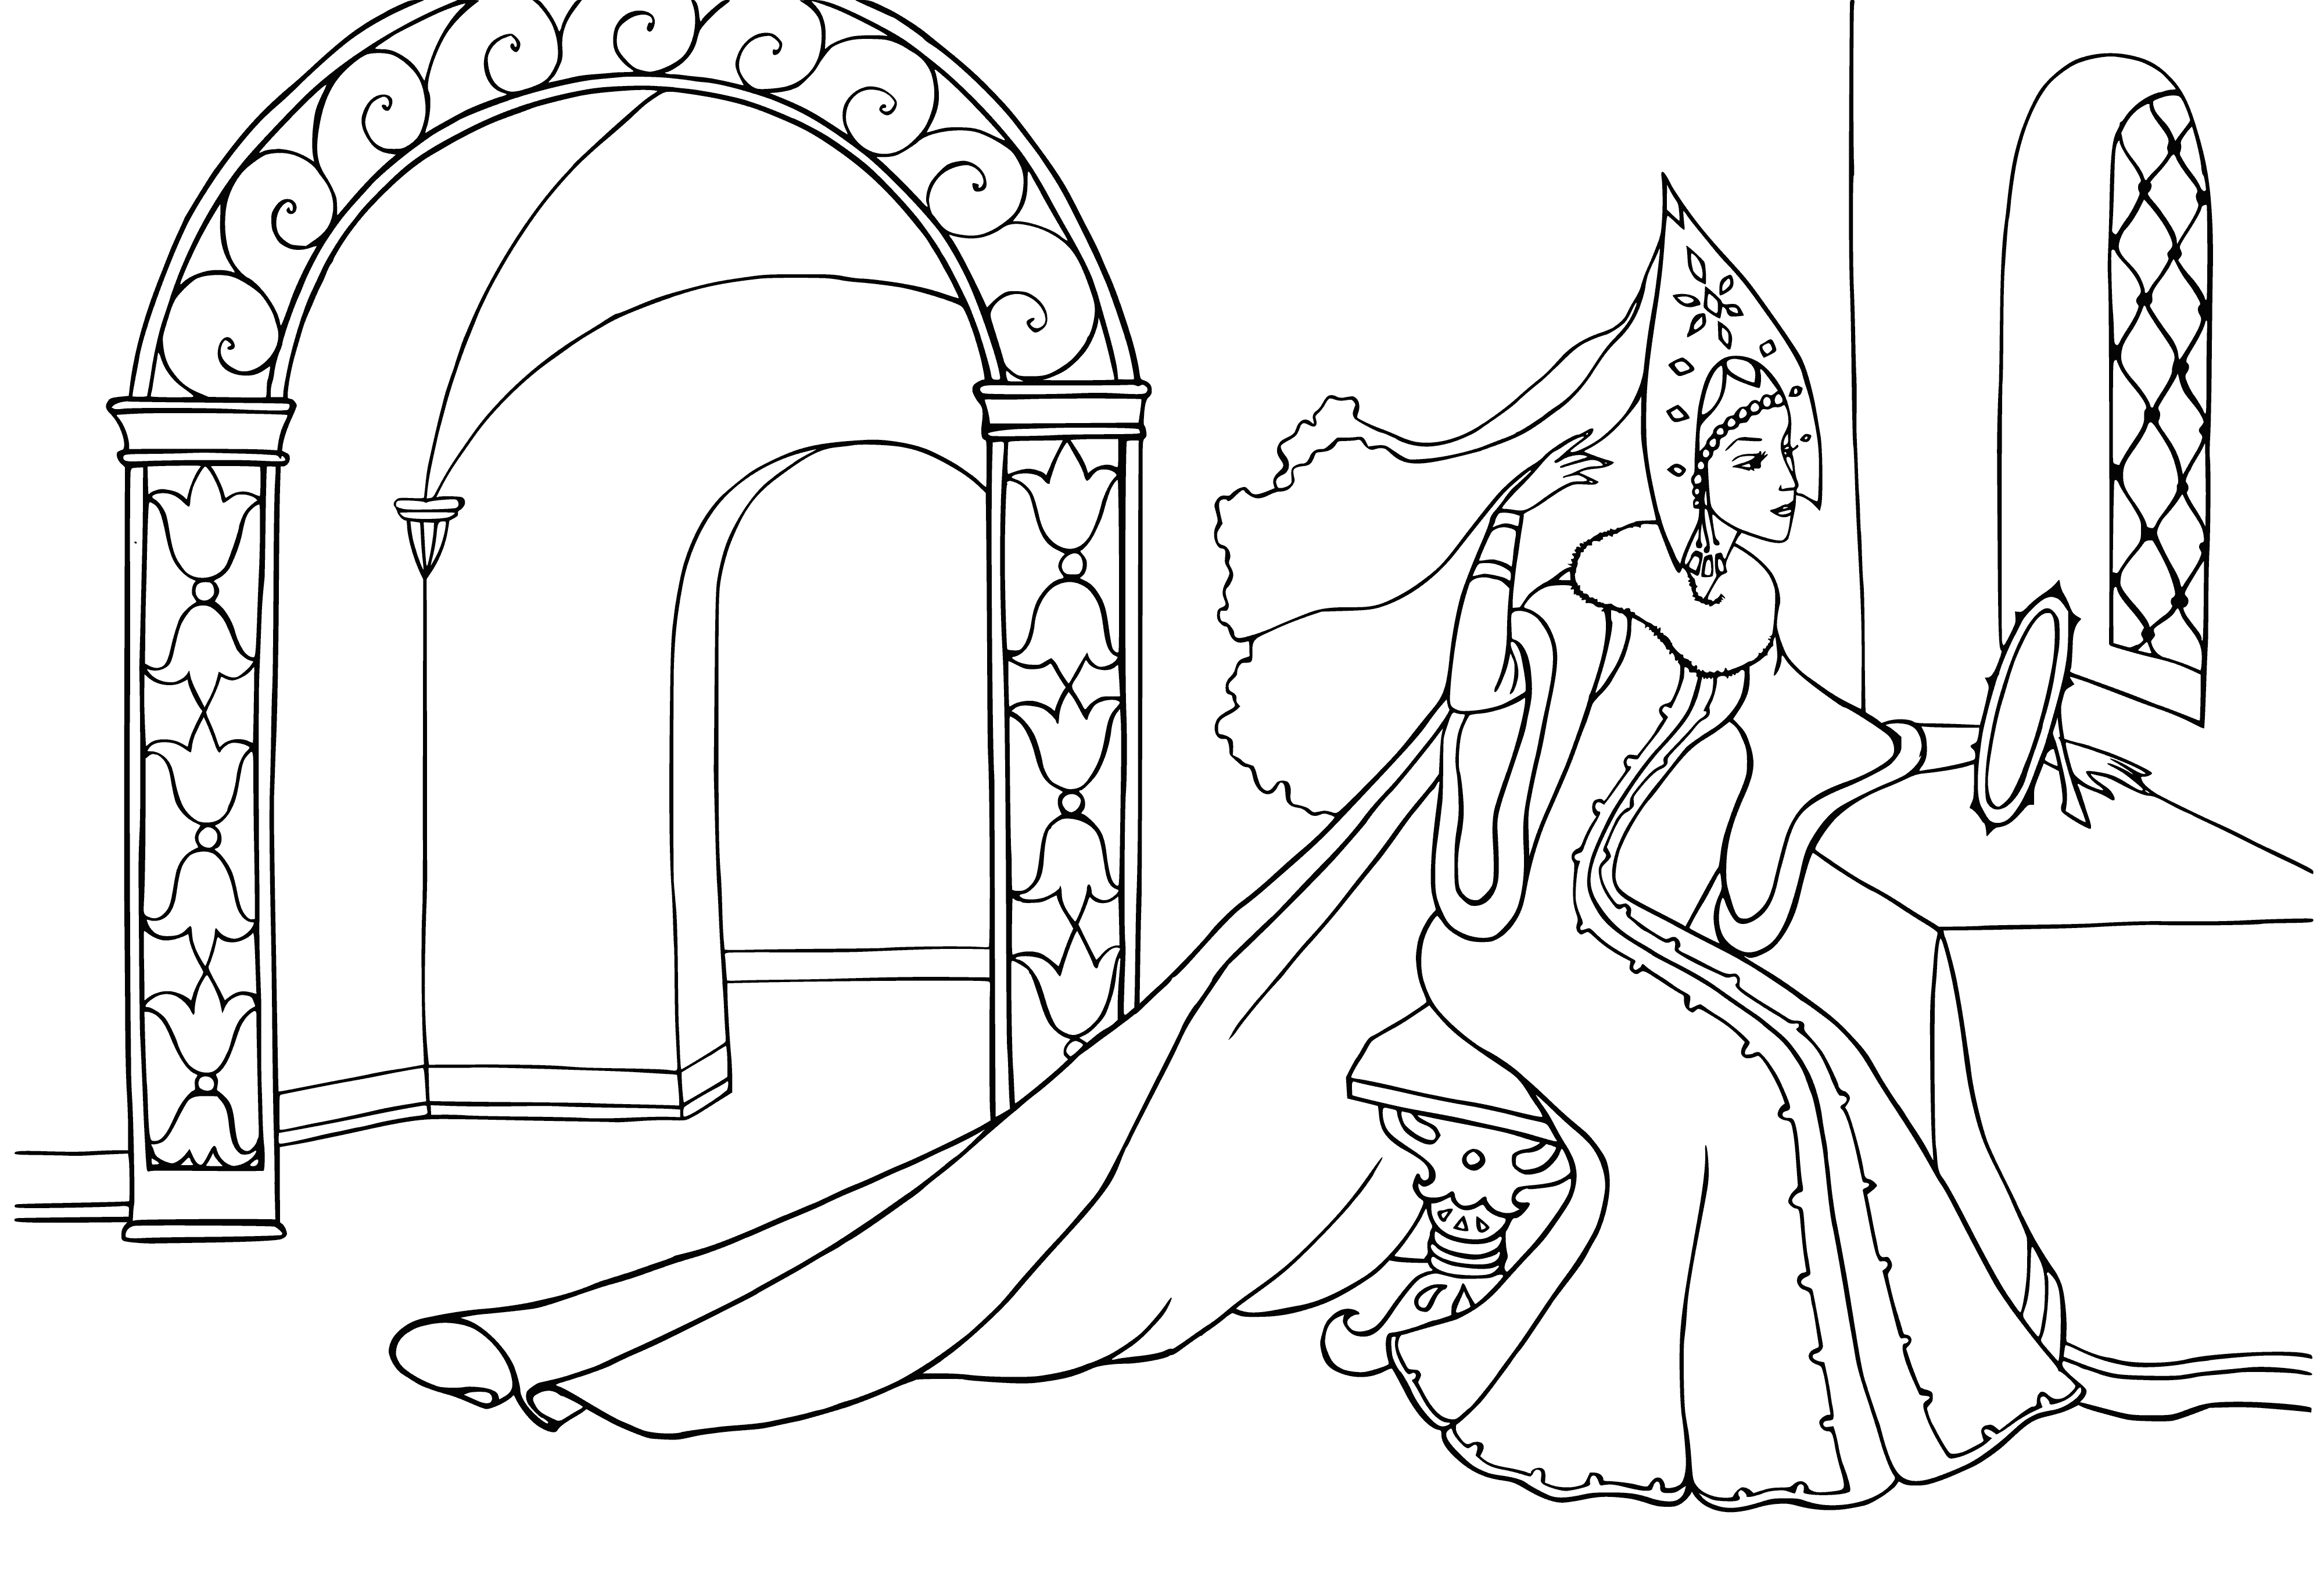 coloring page: Fairy with light blue skin & silver hair stands in front of mirror, wearing glittering dress, looking for something mysterious.